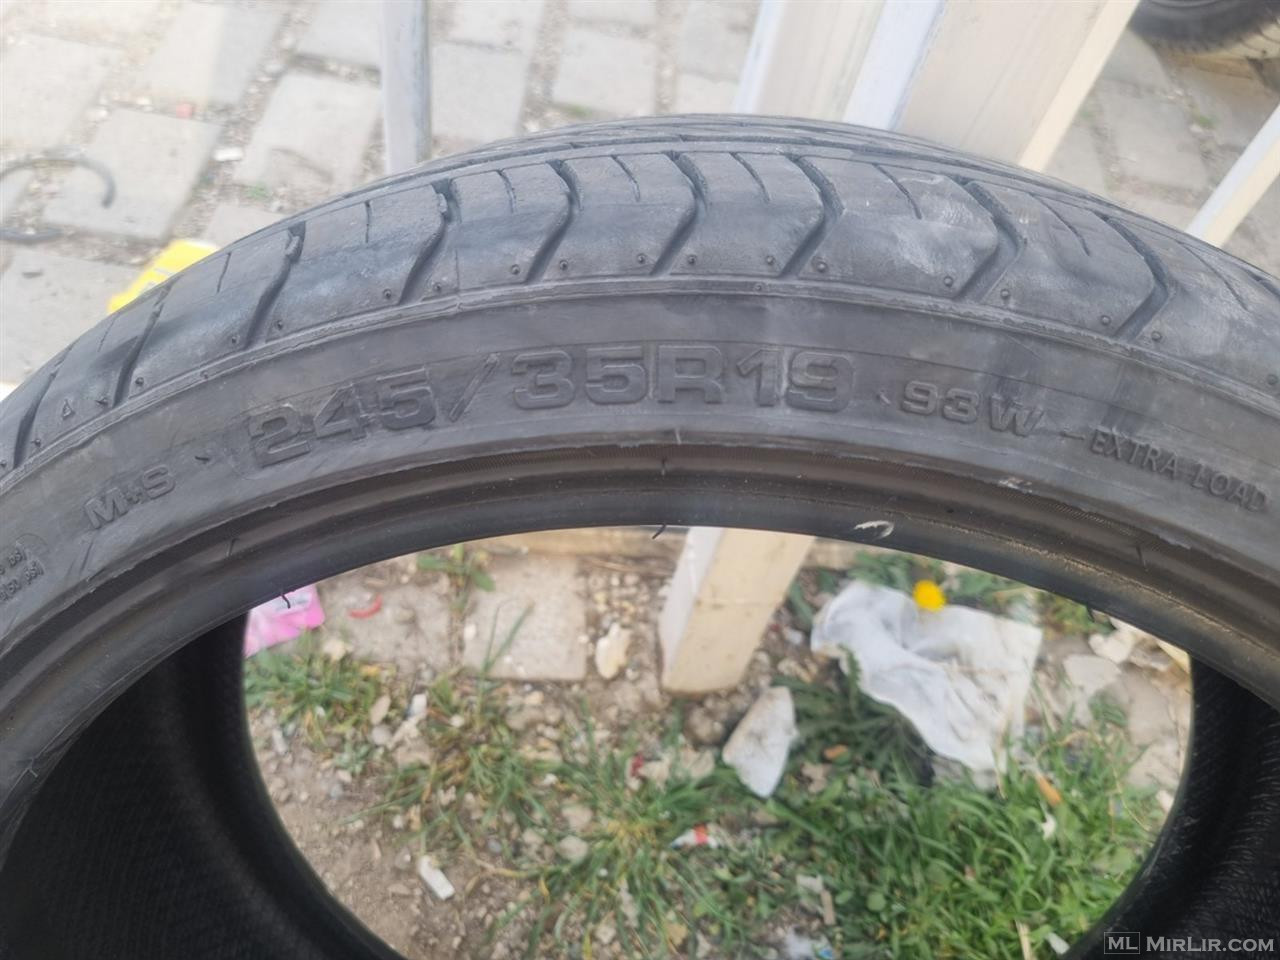 Shes 4 goma 245/35 R 19